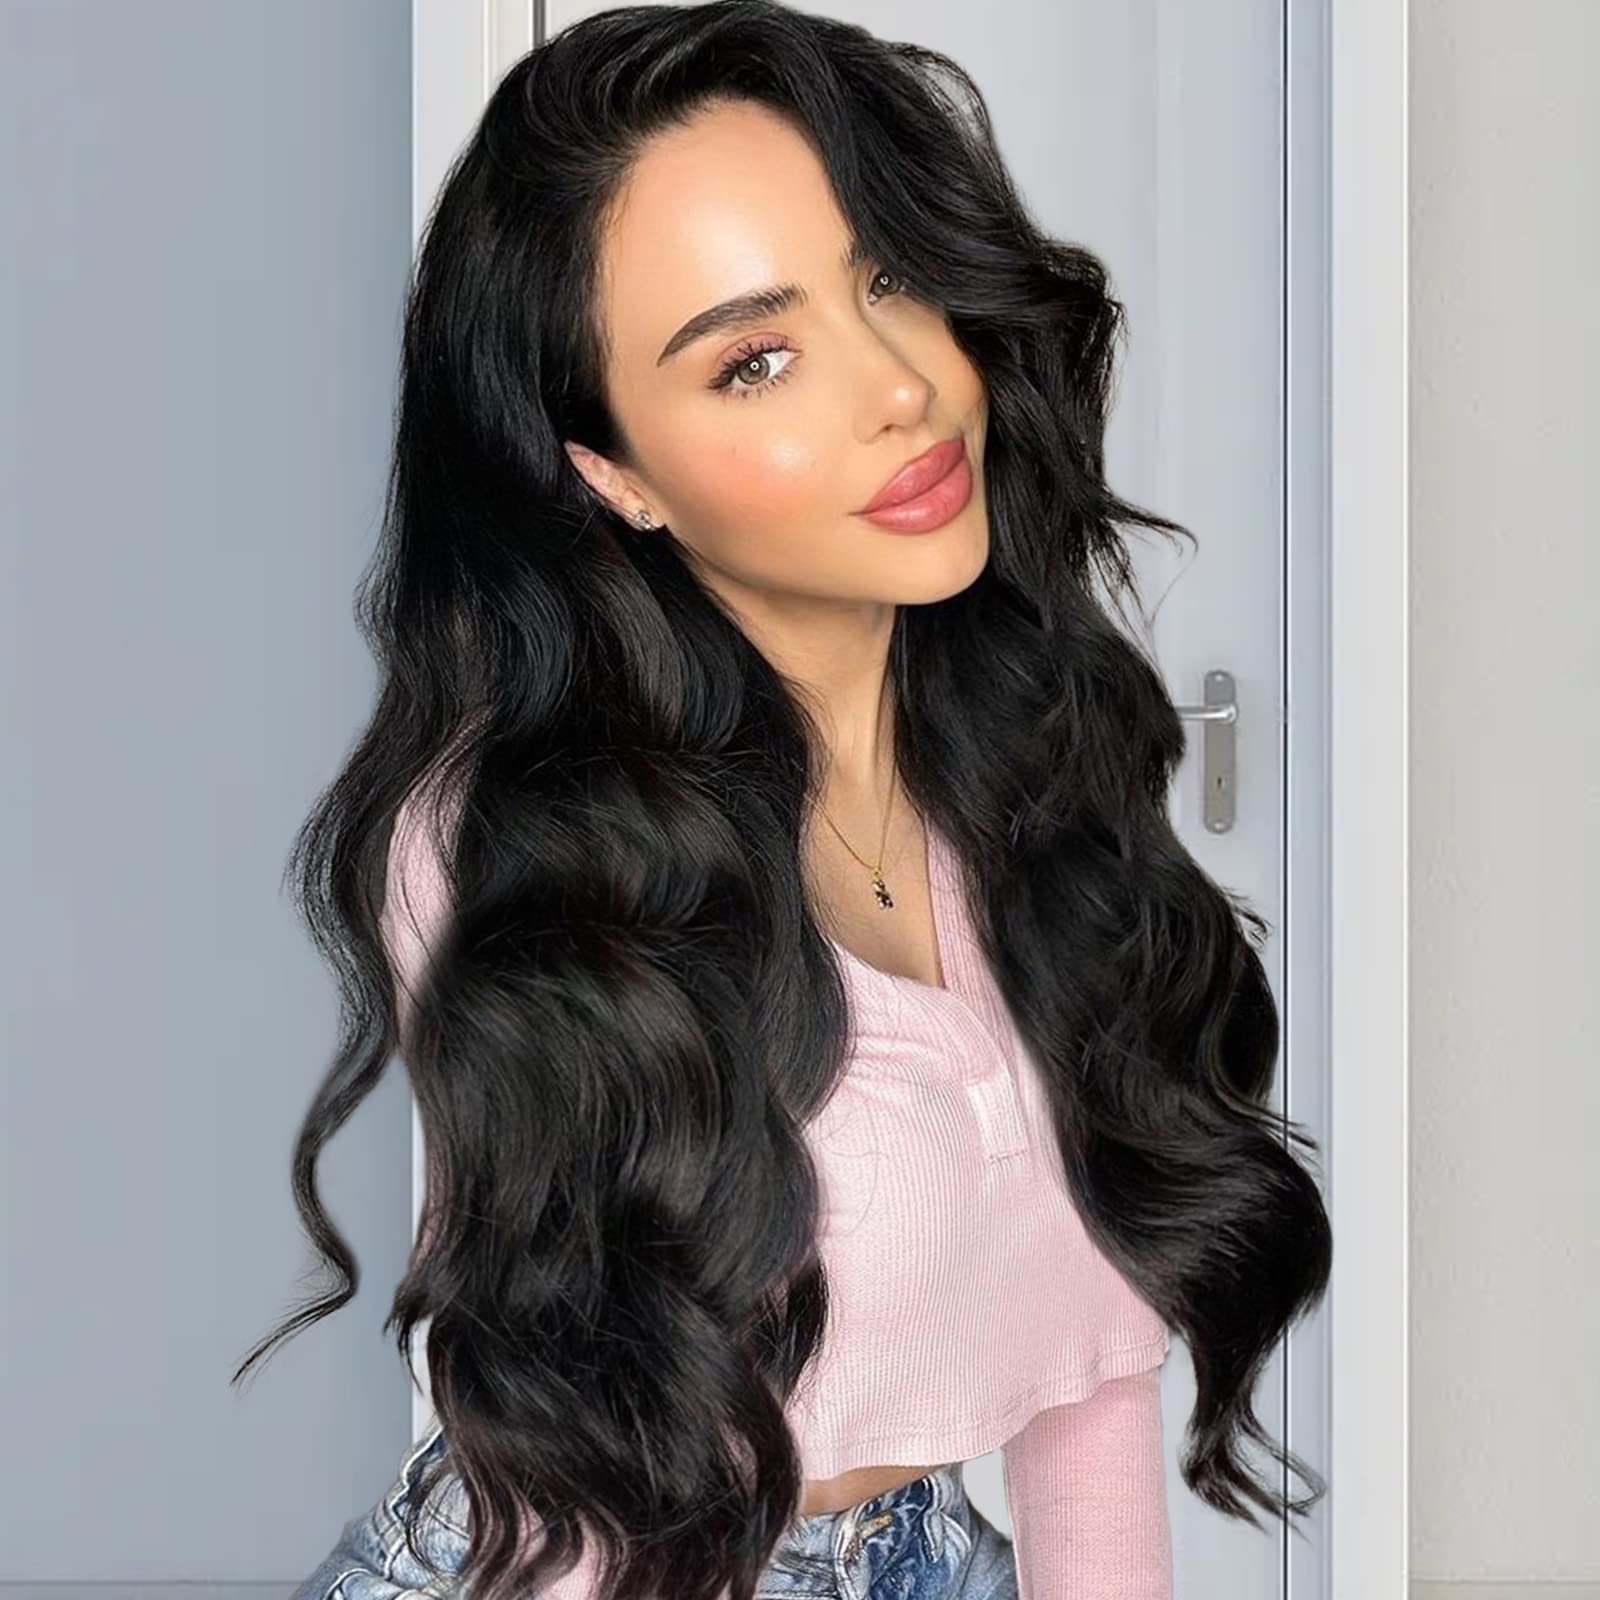 K'ryssma Black Synthetic Wigs for Black Women, Natural Looking Long Wavy Wigs Right Side Parting NONE Lace Front Black Wig Heat Resistant Fiber Wigs Hair Replacement Wig 24 inch